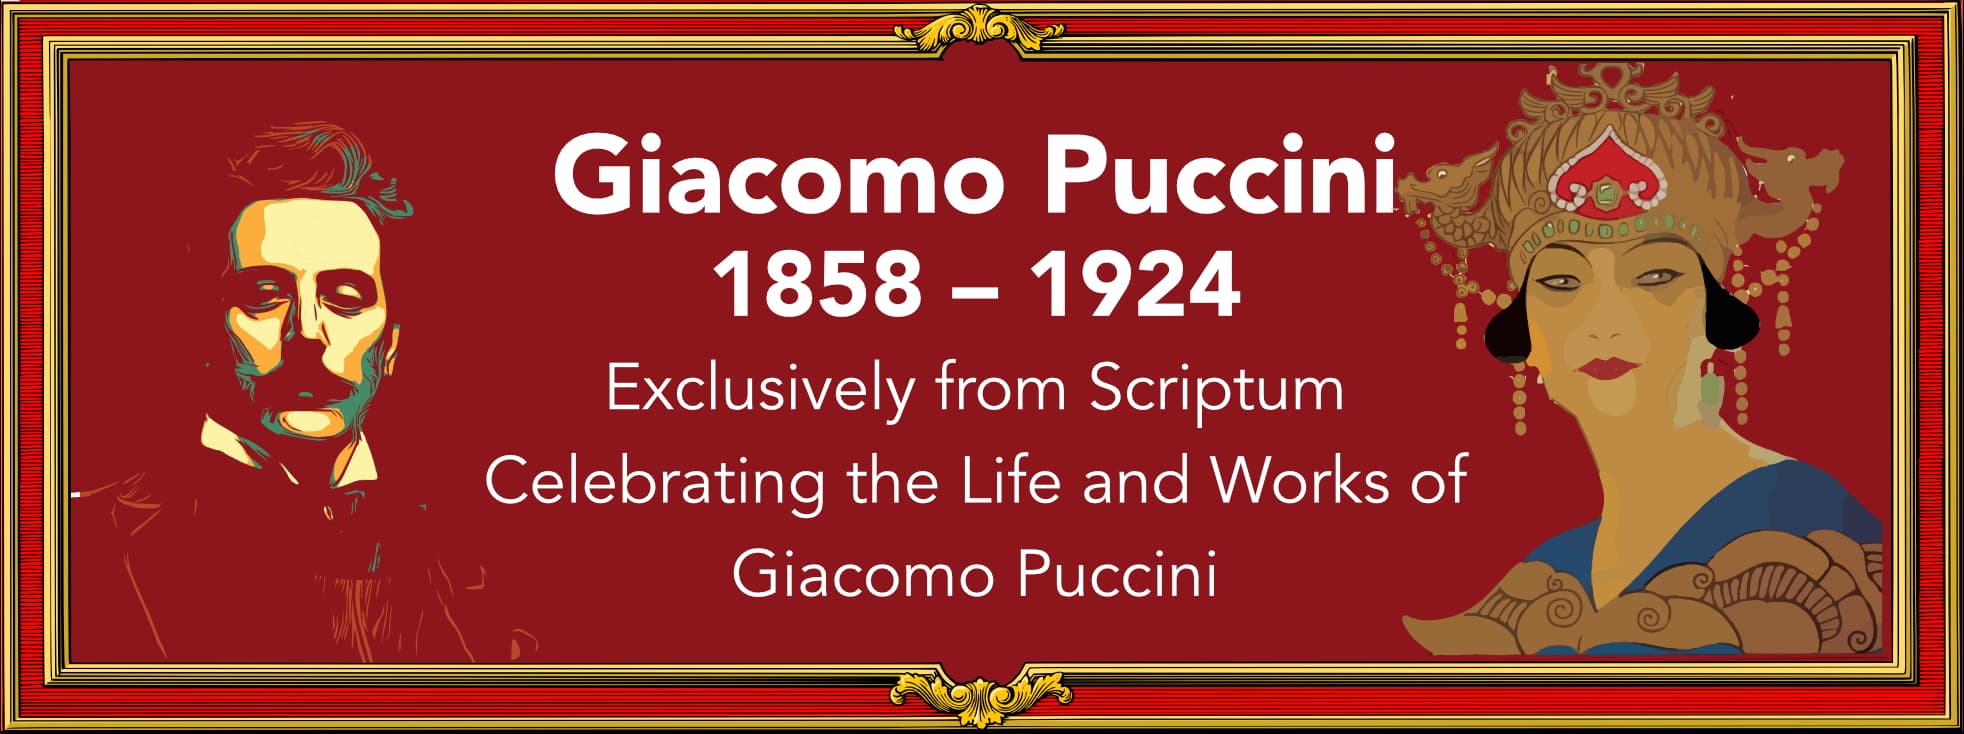 Scriptum's 2024 Collection to Commemorate Puccini's Life and Work